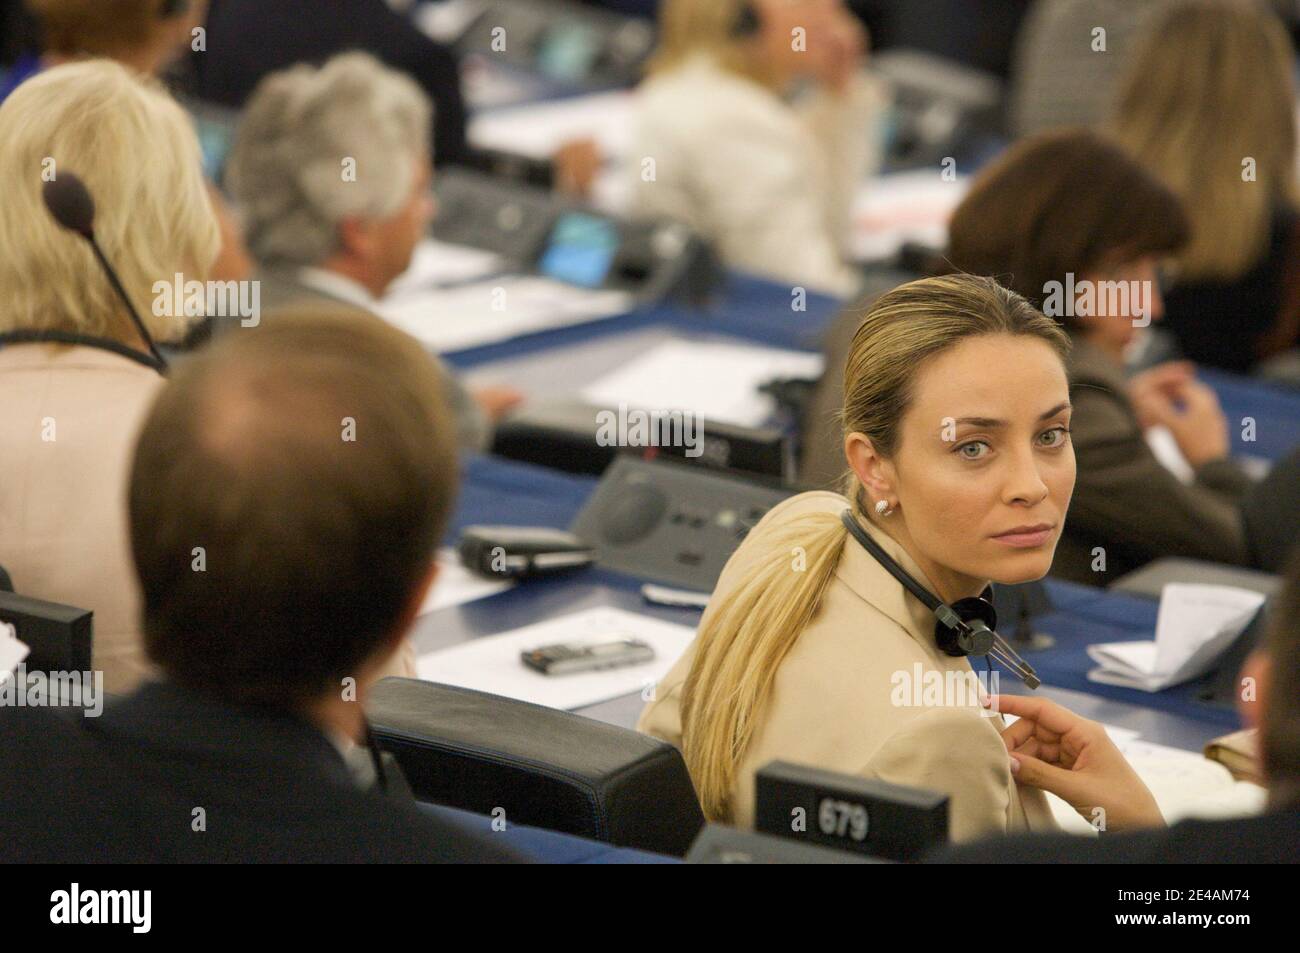 Barbara Matera is pictured on July 14, 2009 during the opening session at the European Parliament in Strasbourg, Eastern FranFrance. Photo by Antoine/ABACAPRESS.COM Stock Photo